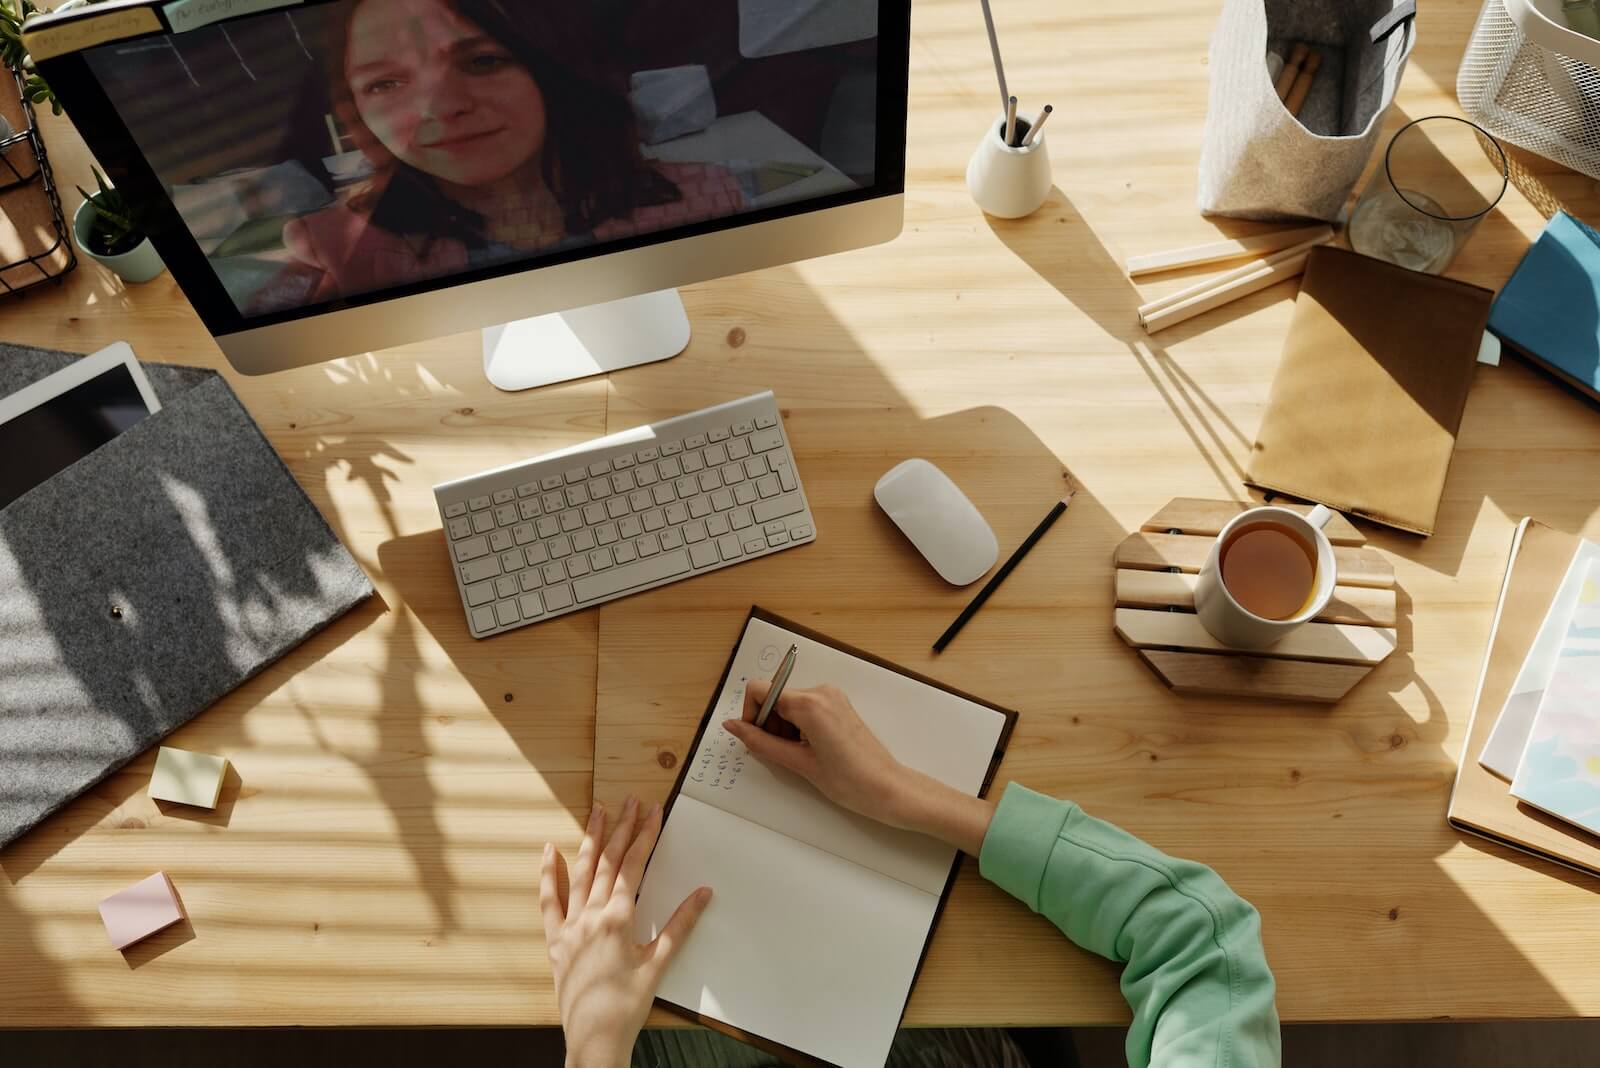 Overhead shot of woman writing in a notebook on a wooden desk while on a video call on a desktop screen